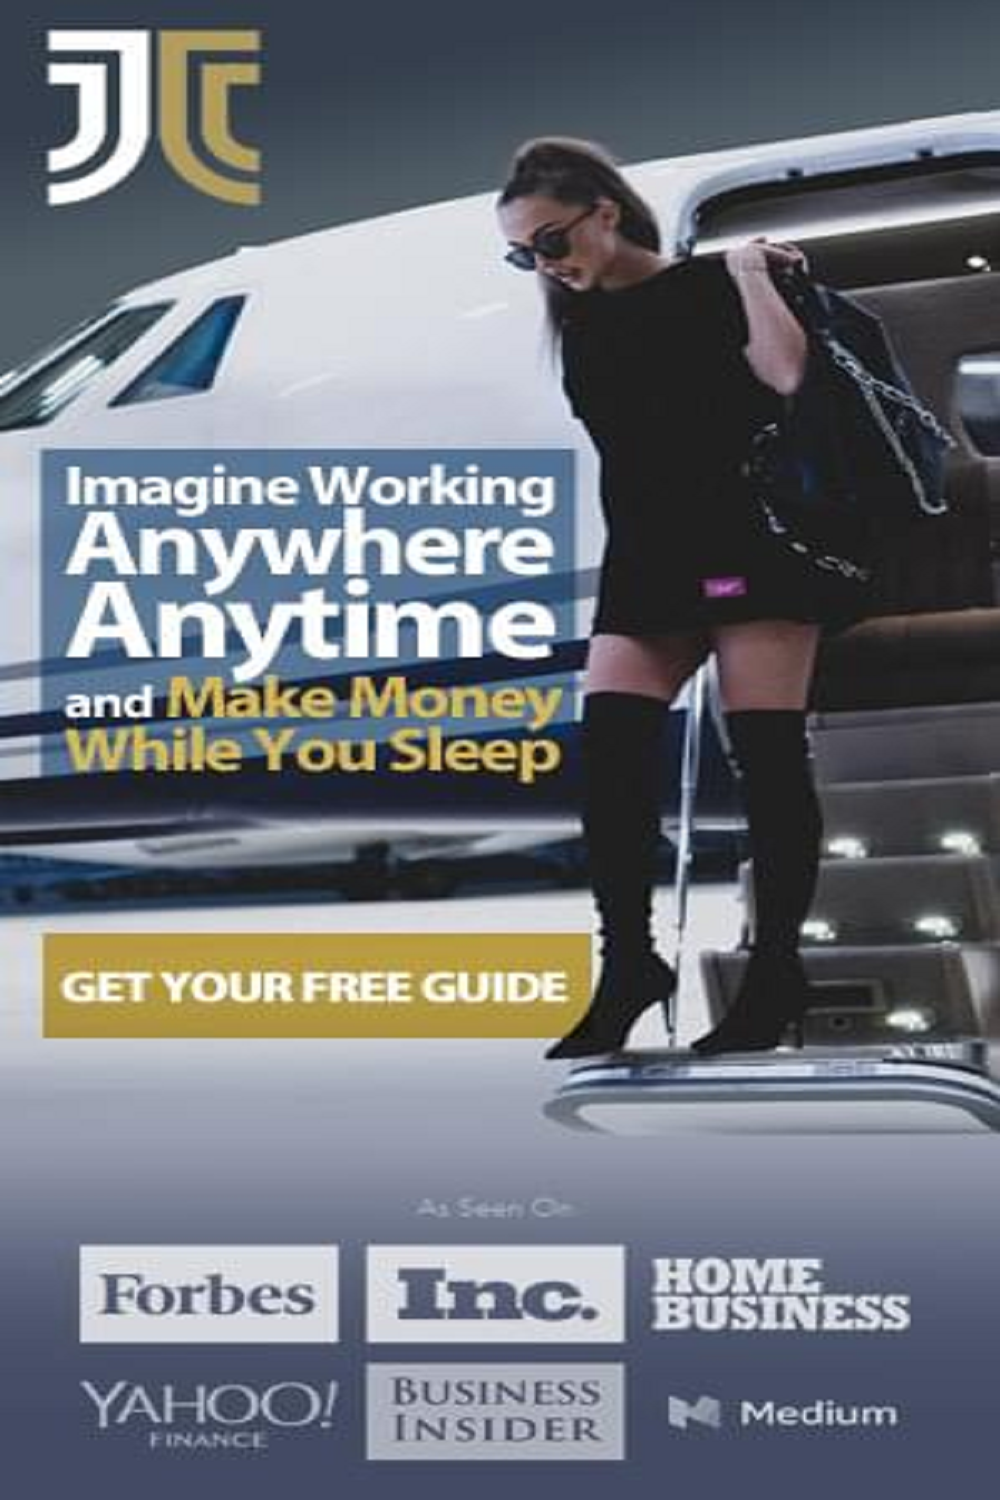 law of attraction imagine working anywhere anytime